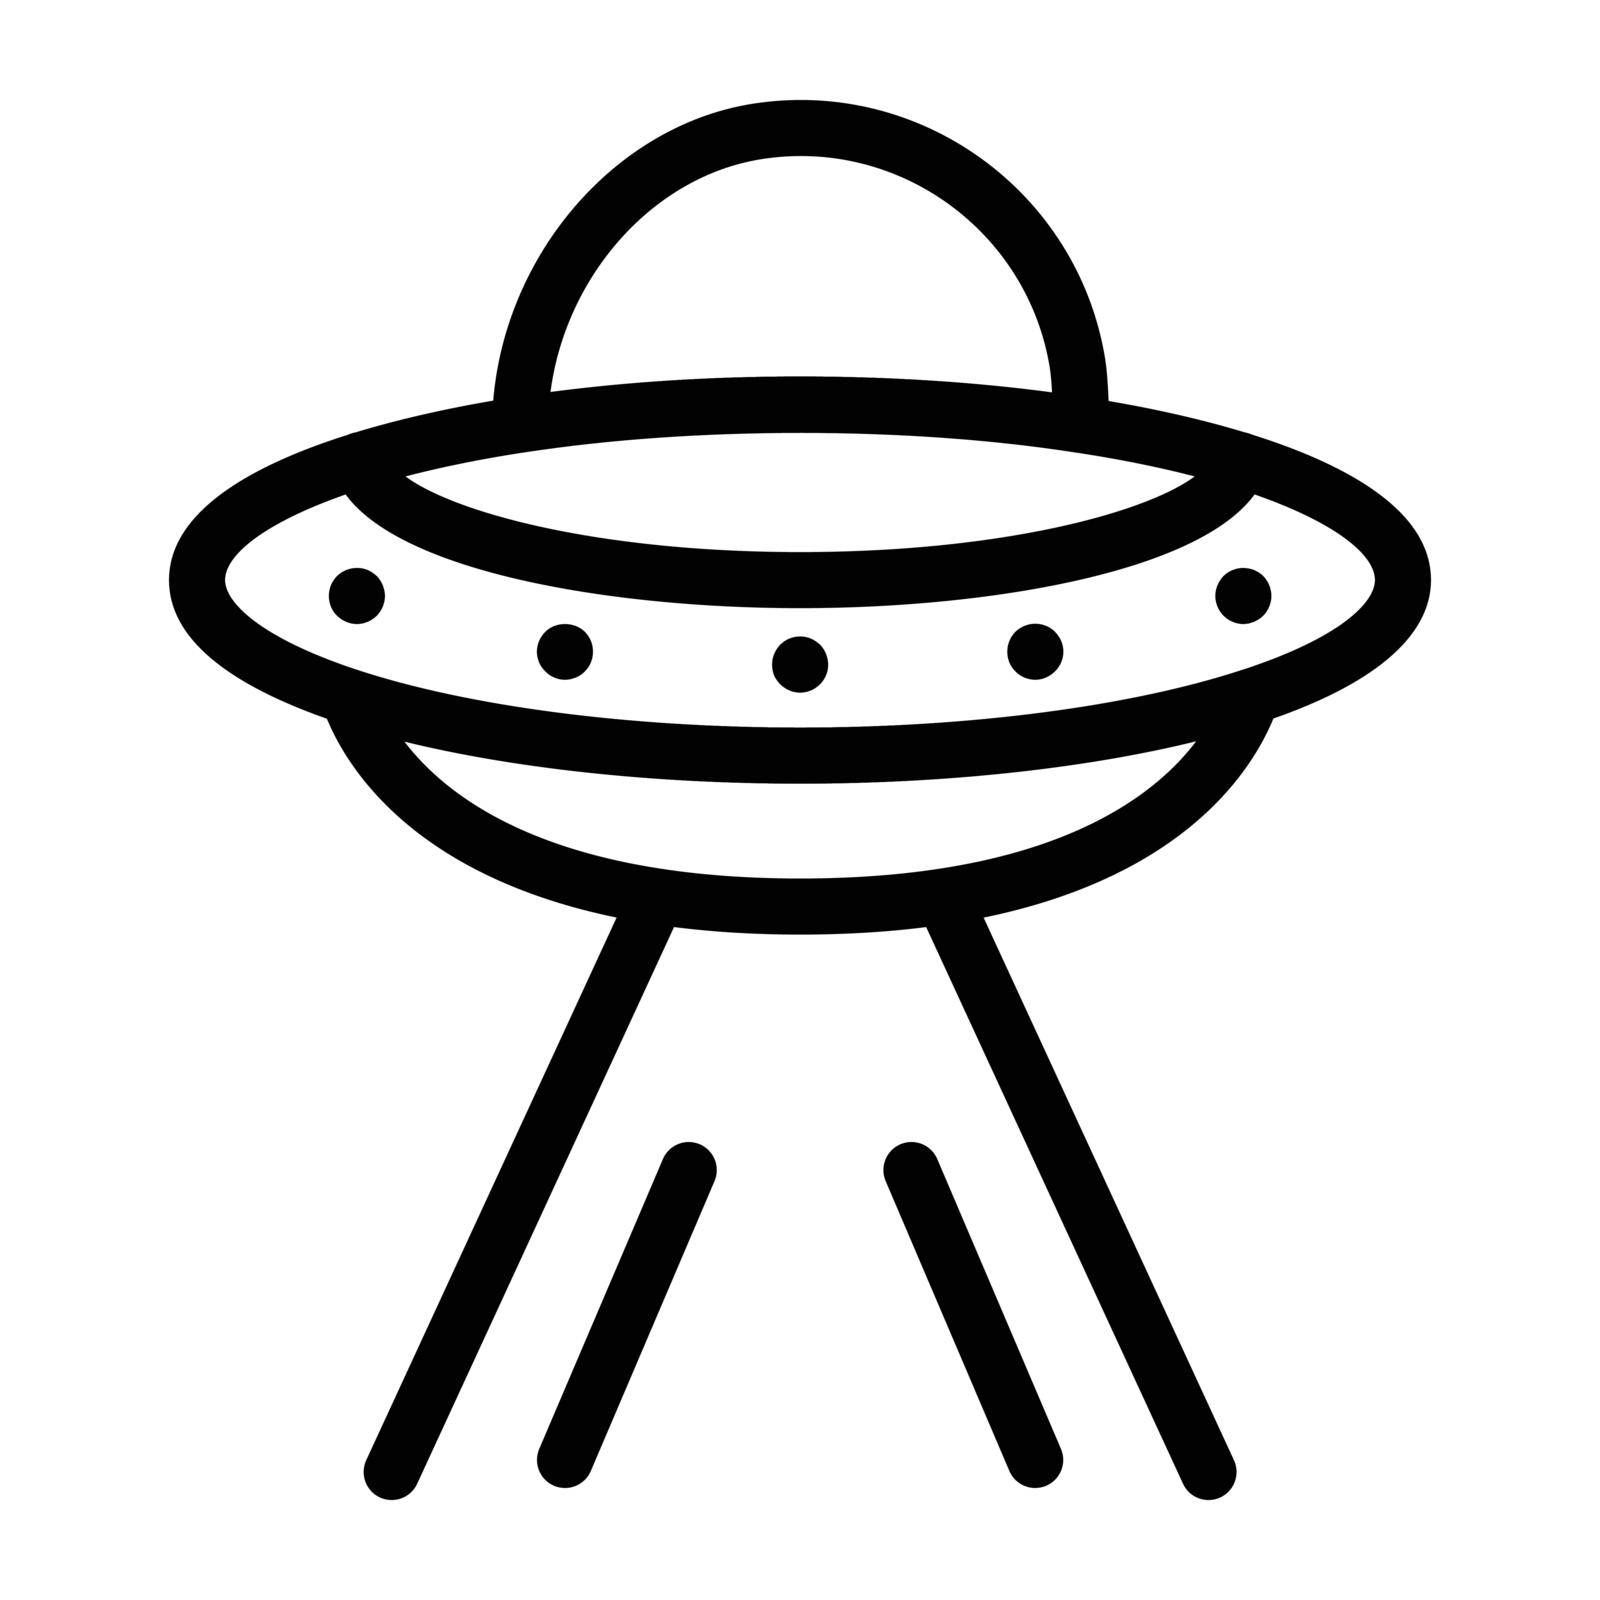 UFO Vector illustration on a transparent background. Premium quality symbols. Stroke vector icon for concept and graphic design